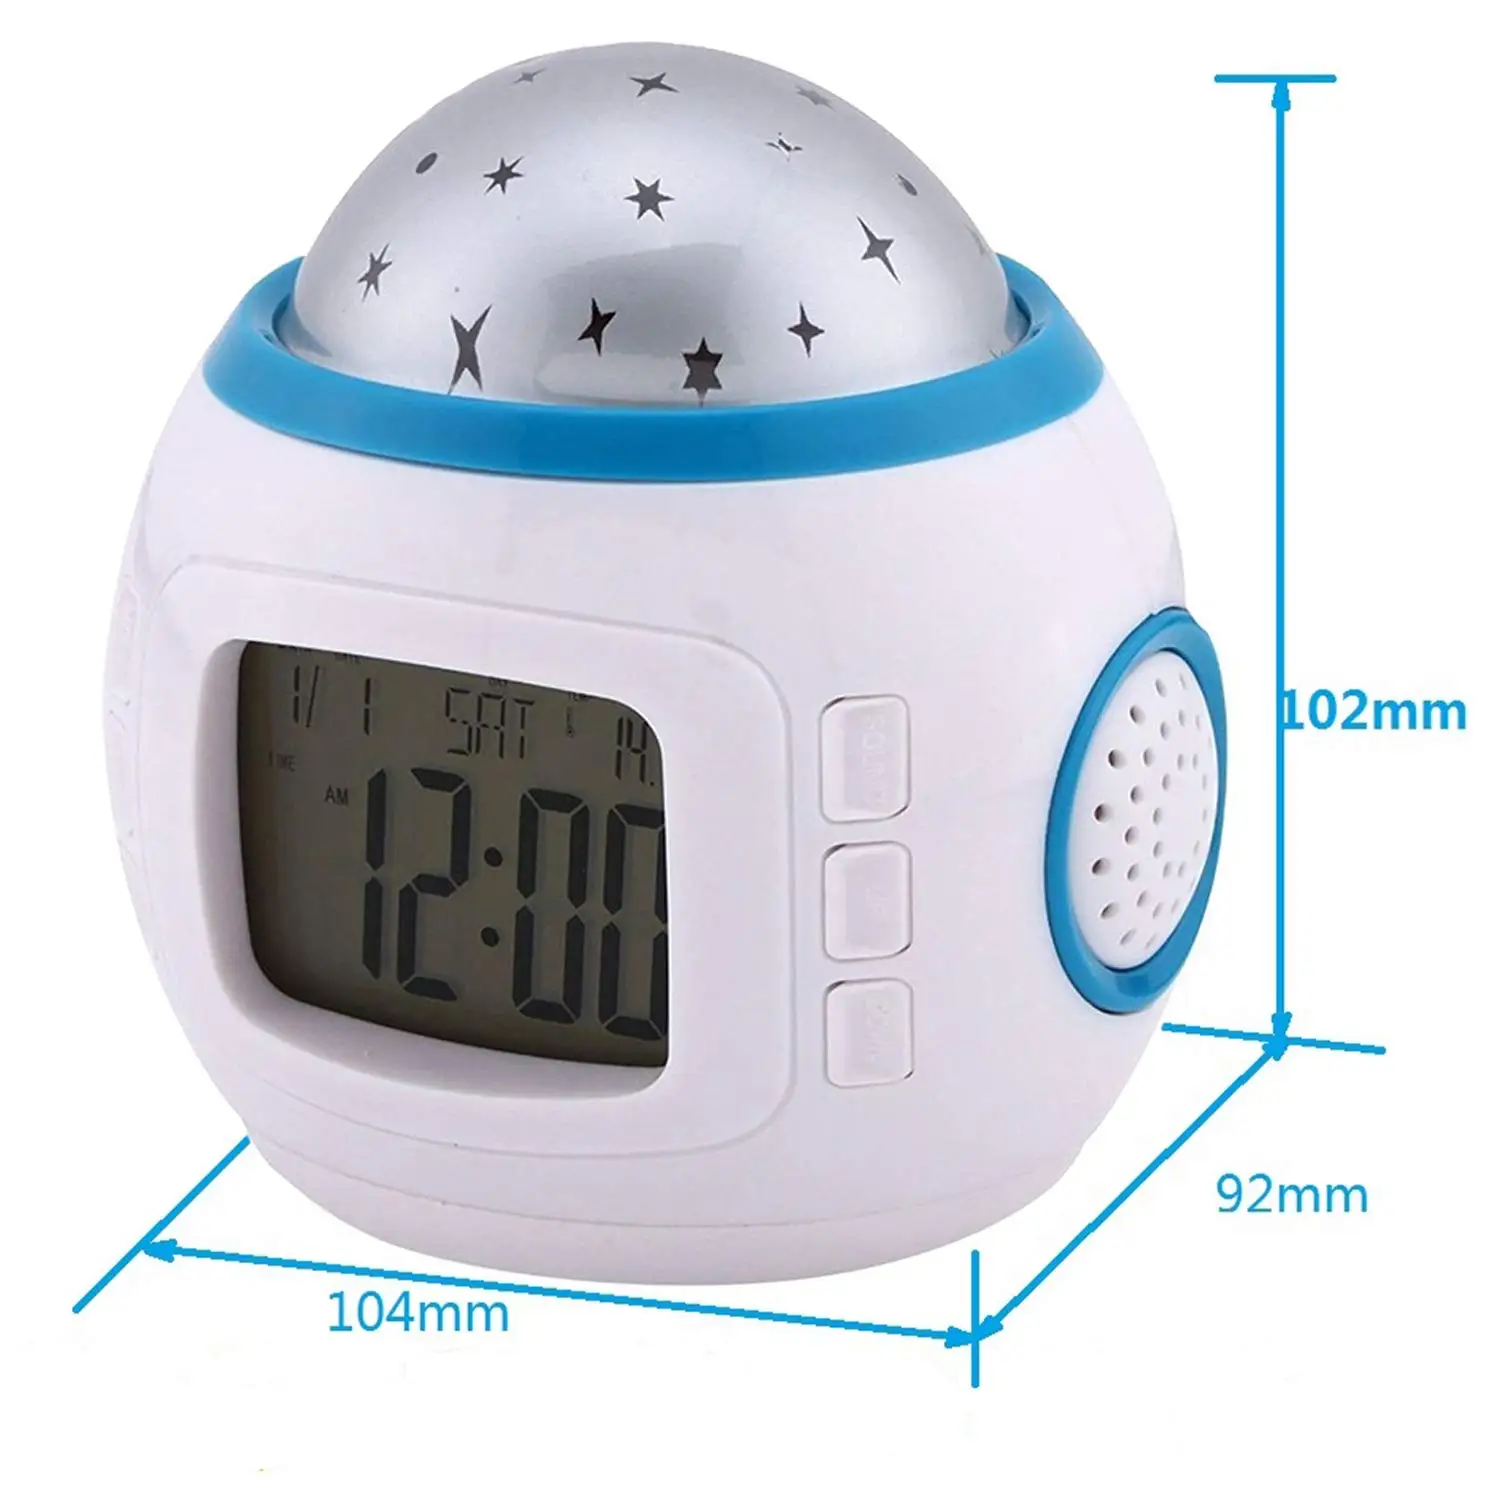 Digital Projection Clock Countdown Timer Snooze 12/24H Alarm Desk Clock with Temperature Display